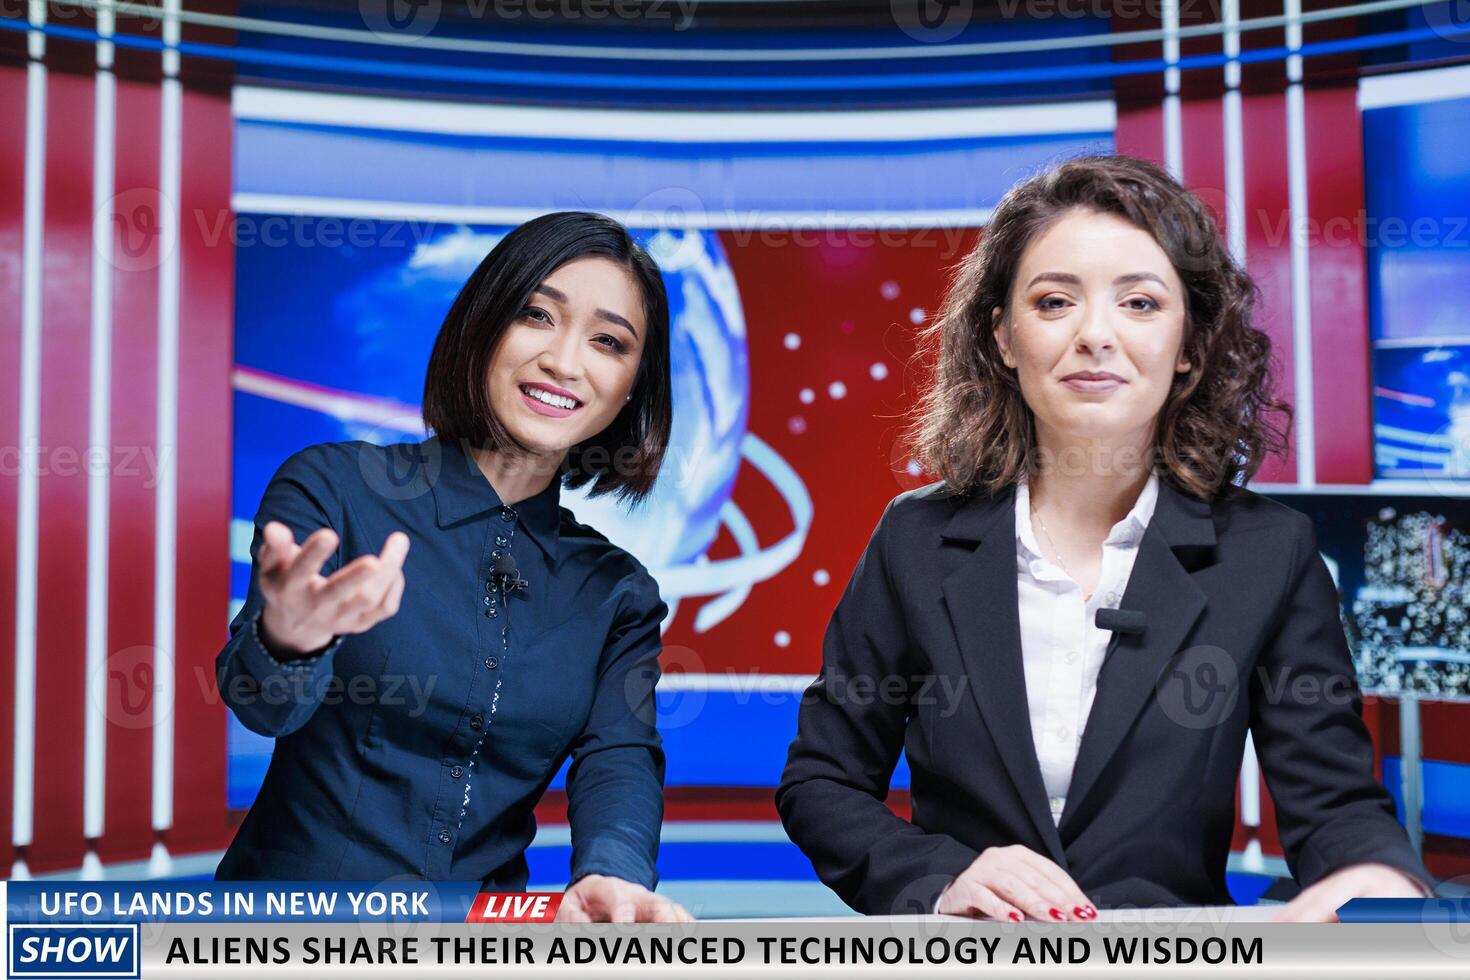 Newscasters share aliens practises after ufo lands in new york and present their advanced technology and wisdom to people. Team of tv reporters going live on morning show transmission. photo